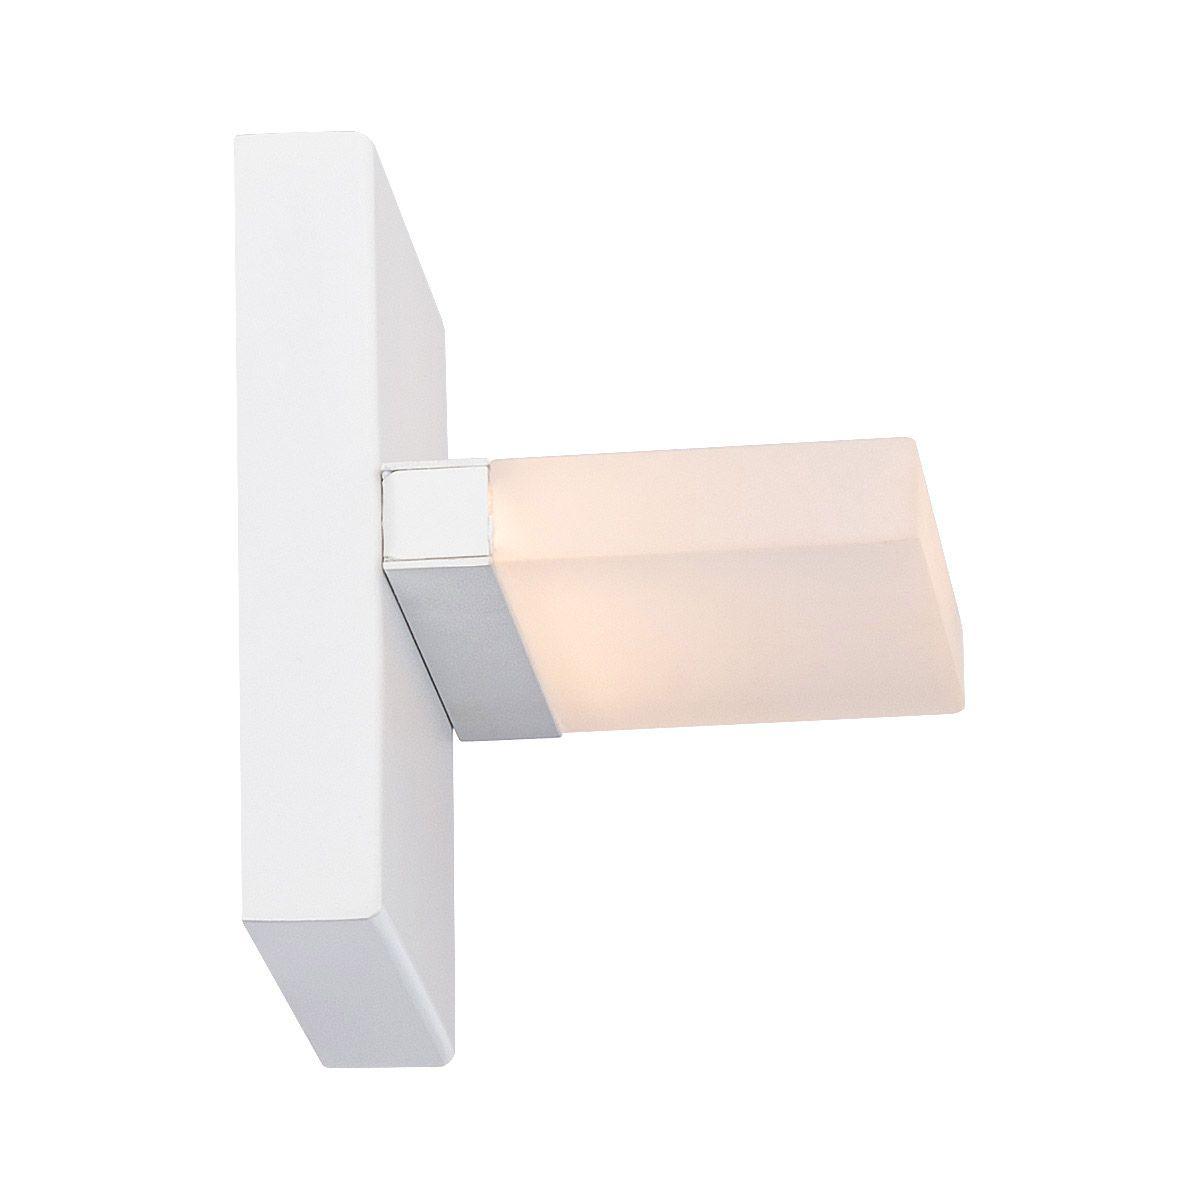 Oslo 5 in LED Outdoor Wall Sconce